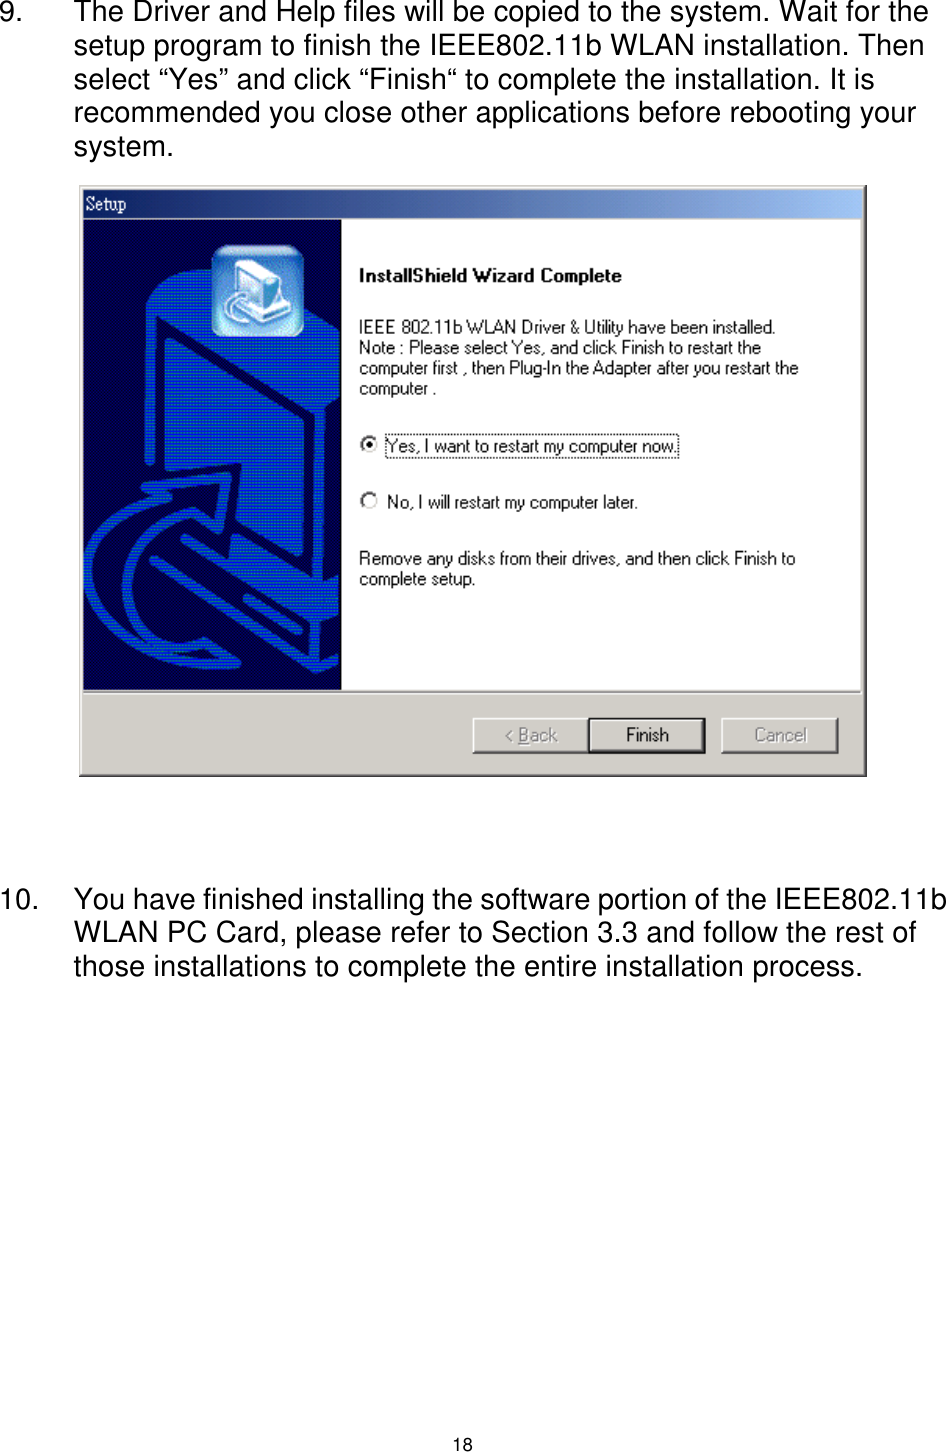  18 9.  The Driver and Help files will be copied to the system. Wait for the setup program to finish the IEEE802.11b WLAN installation. Then select “Yes” and click “Finish“ to complete the installation. It is recommended you close other applications before rebooting your system.                10.  You have finished installing the software portion of the IEEE802.11b WLAN PC Card, please refer to Section 3.3 and follow the rest of those installations to complete the entire installation process. 